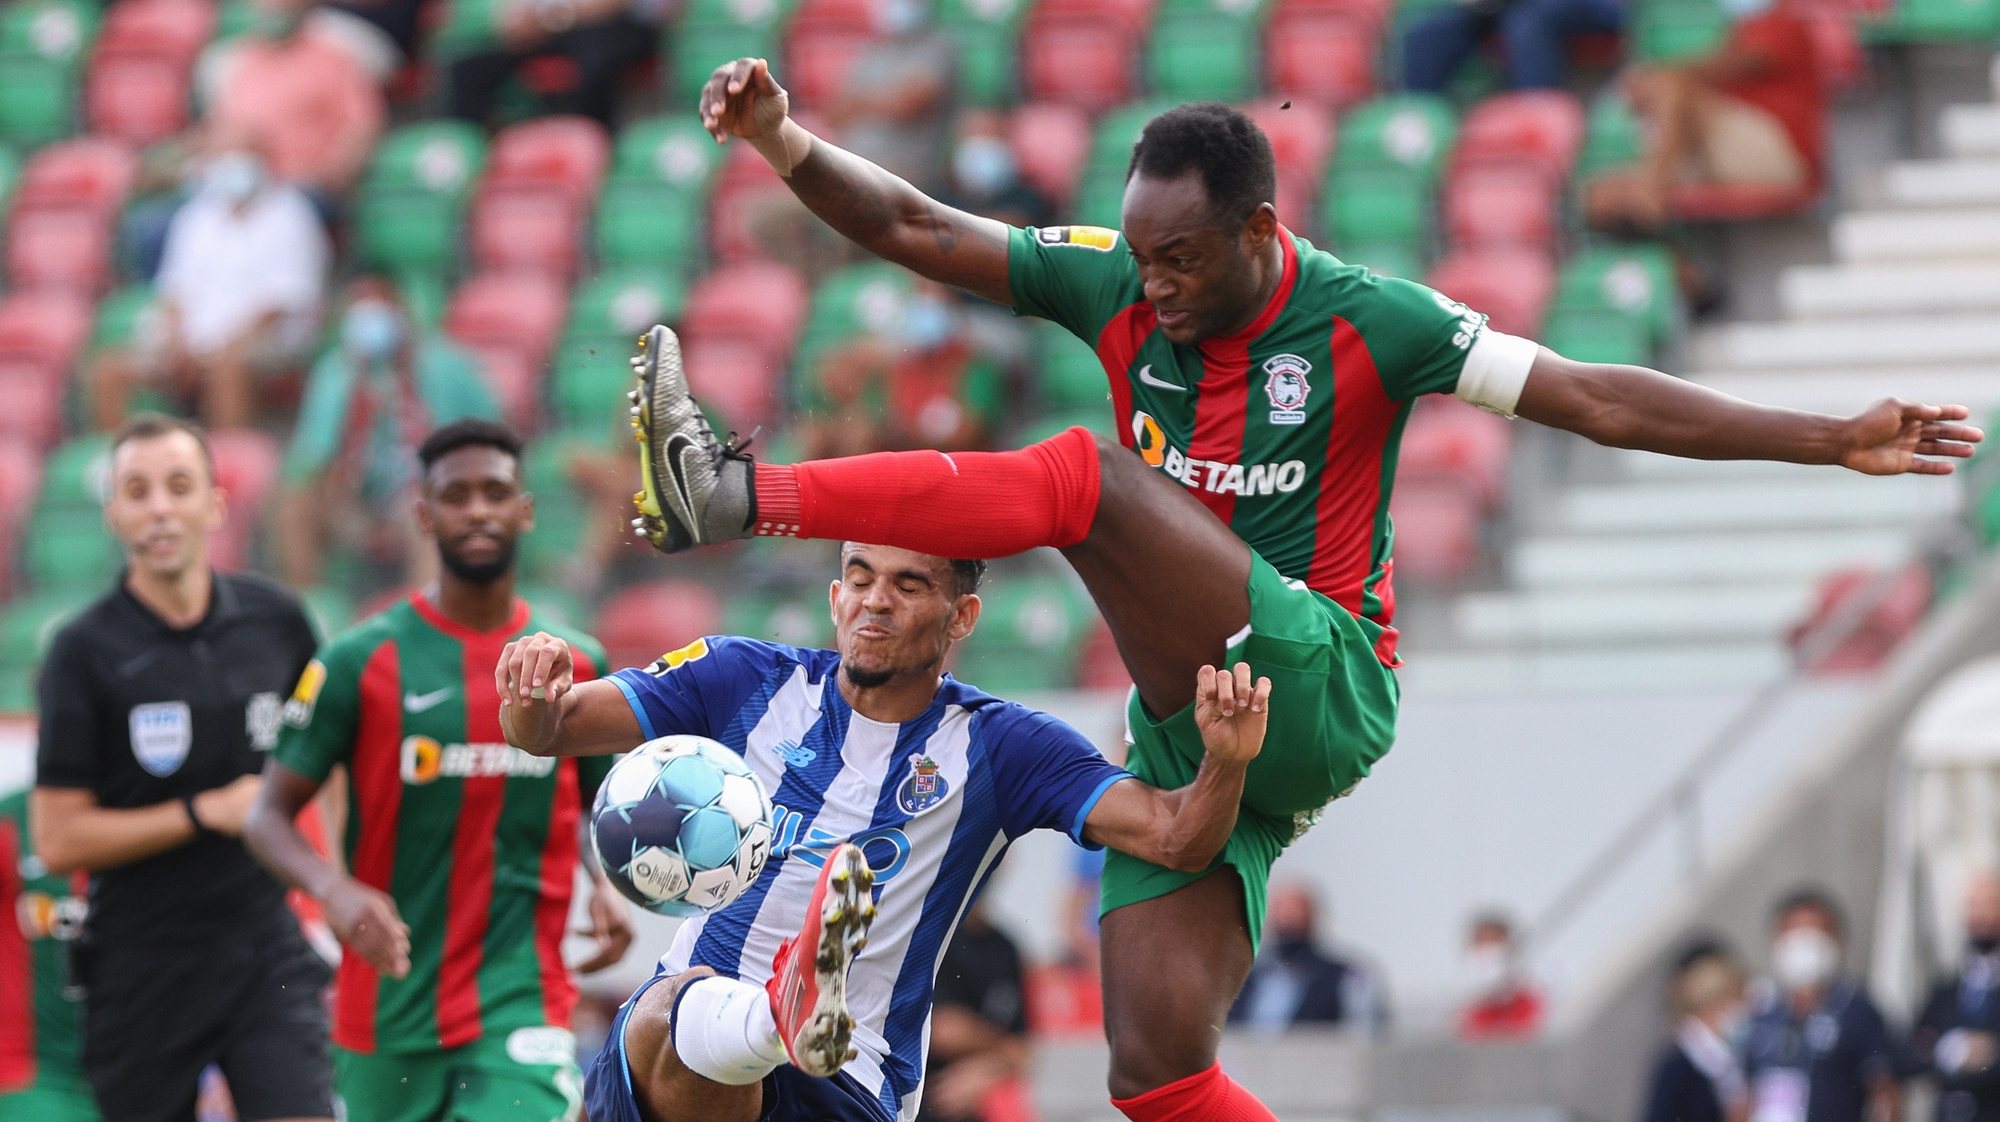 Maritimo&#039;s Zainadine (R) in action against FC Porto&#039;s Luis Diaz (2-R) during the Portuguese First League soccer match between Maritimo and FC Porto at Maritimo&#039;s stadium in Funchal, Madeira Island, Portugal, 22 August 2021. GREGORIO CUNHA/LUSA